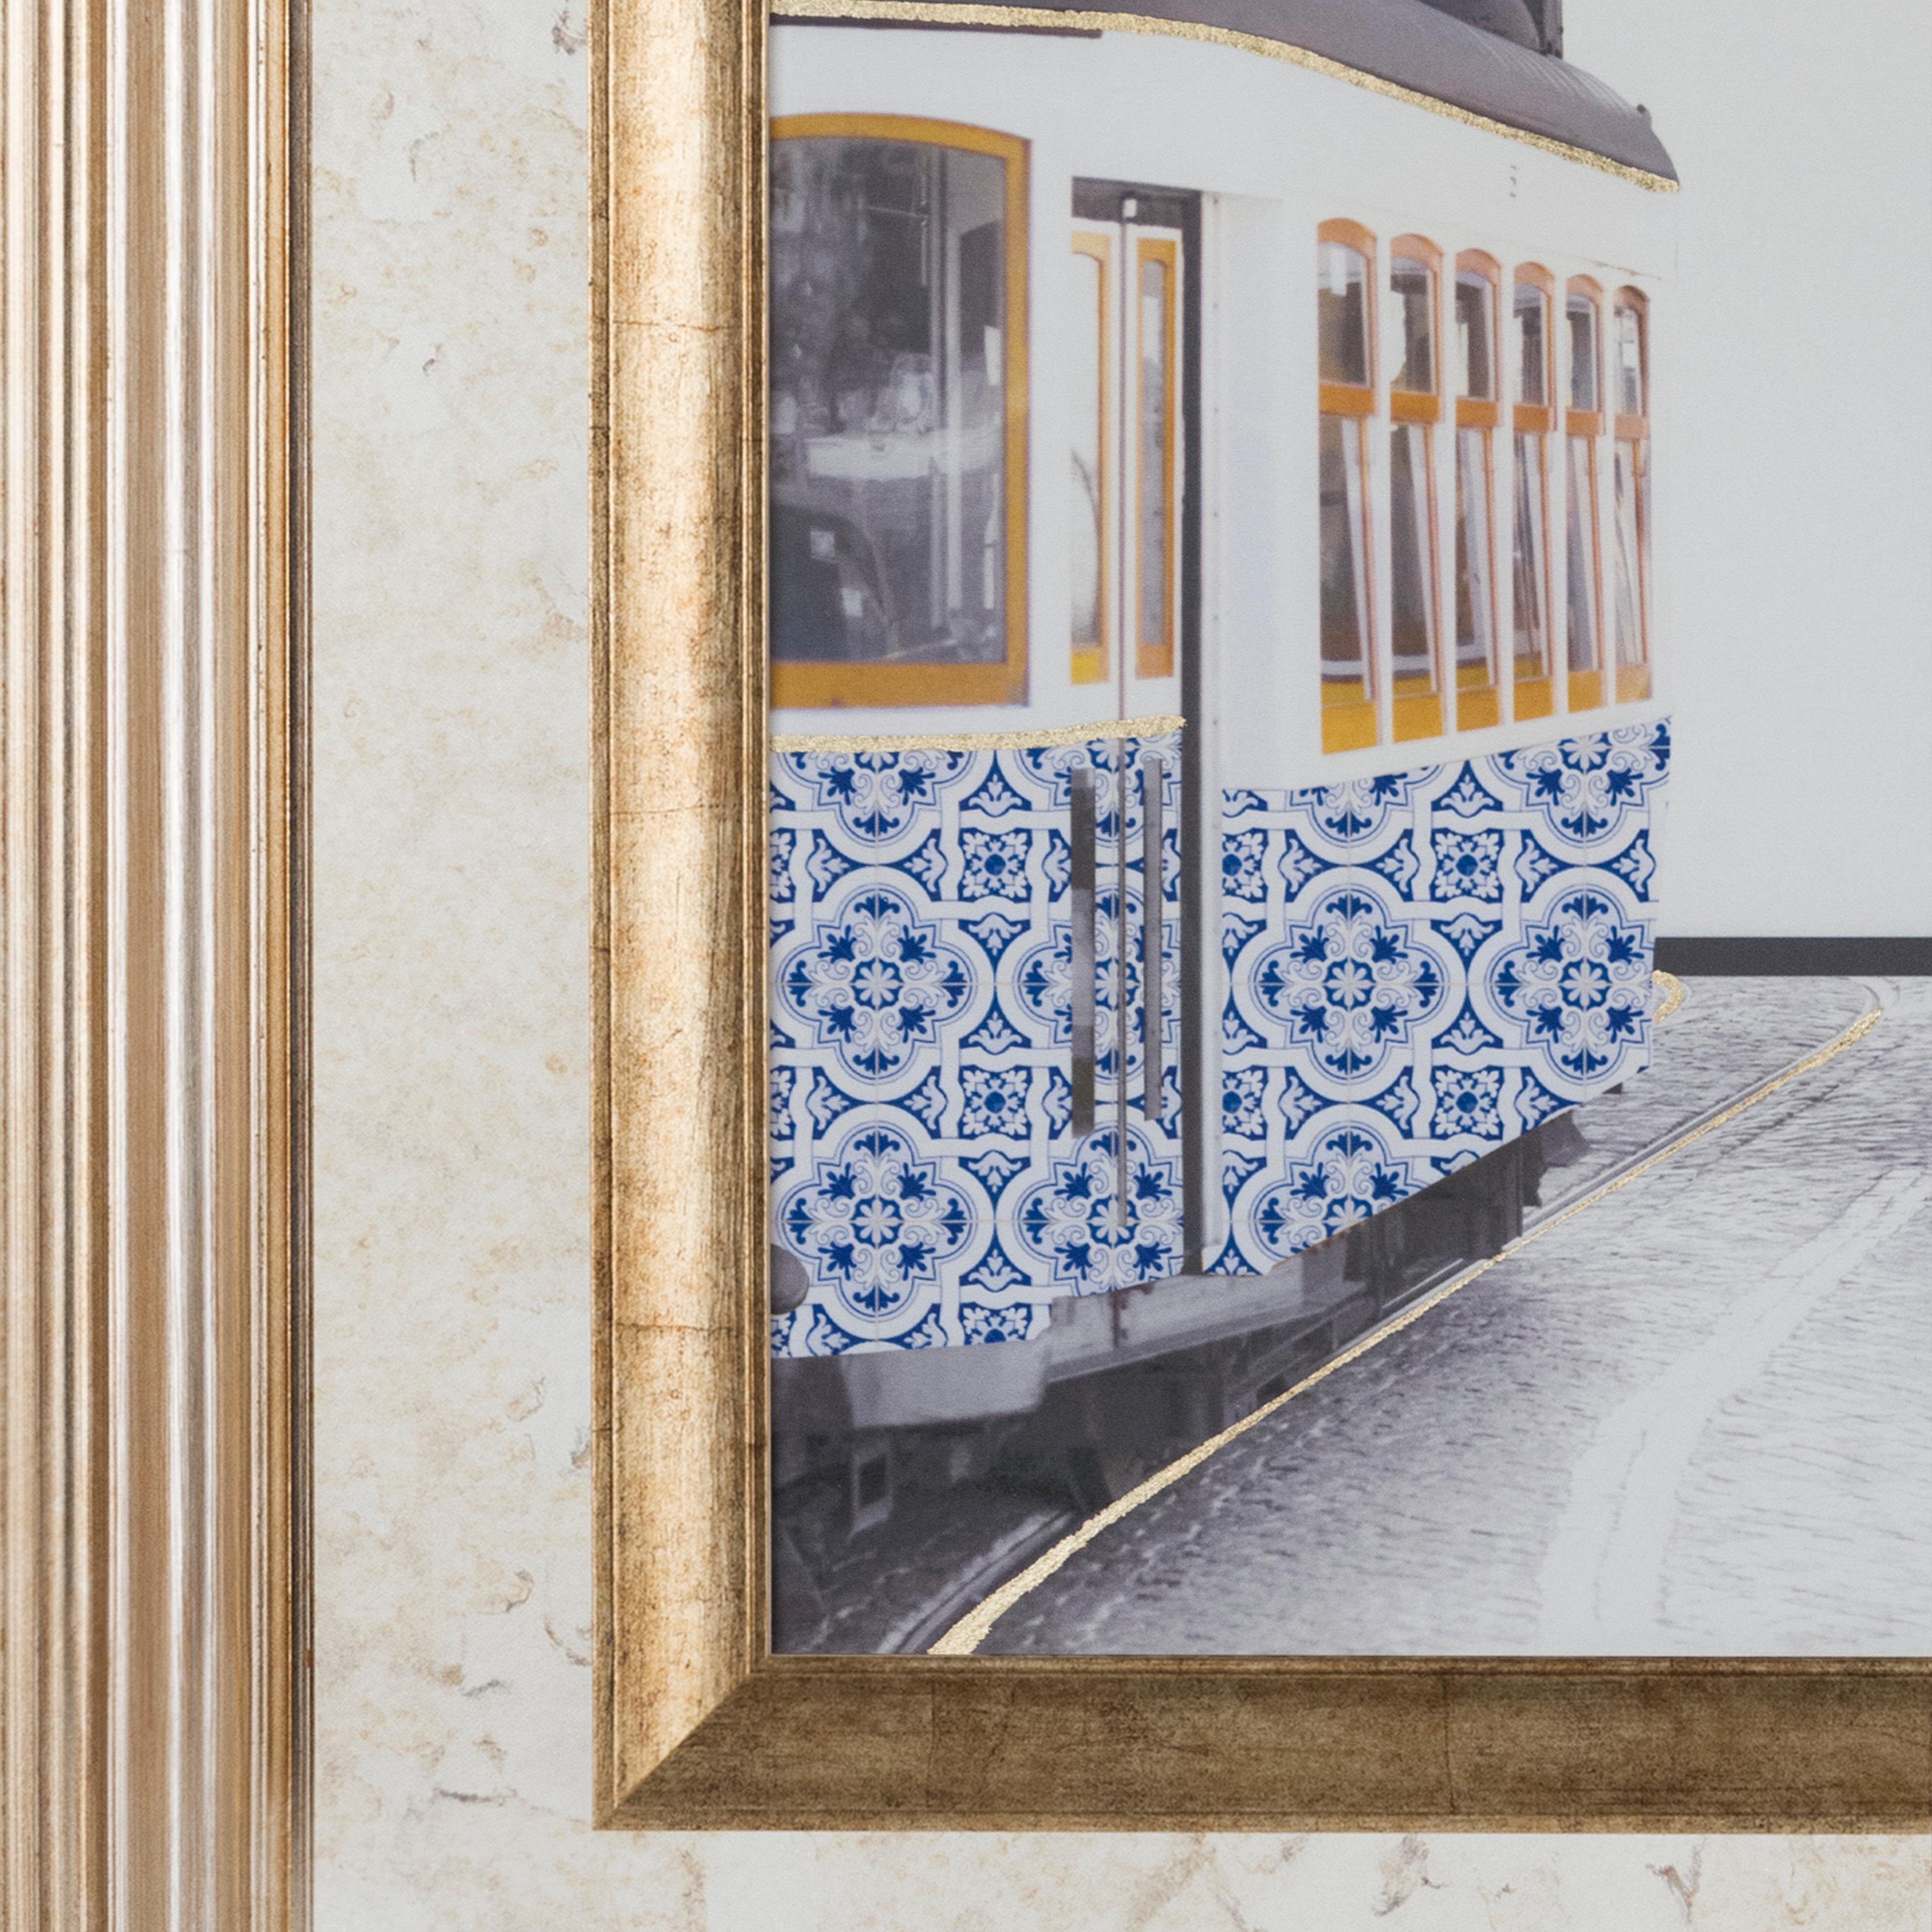 Alfama Wall Art, Lusitanus Home Collection, Handcrafted in Portugal - Europe by Lusitanus Home.

Alfama wall art has an exclusive hand-painted design by Greenapple, inspired by the Portuguese tiles and Lisbon's oldest and most emblematic